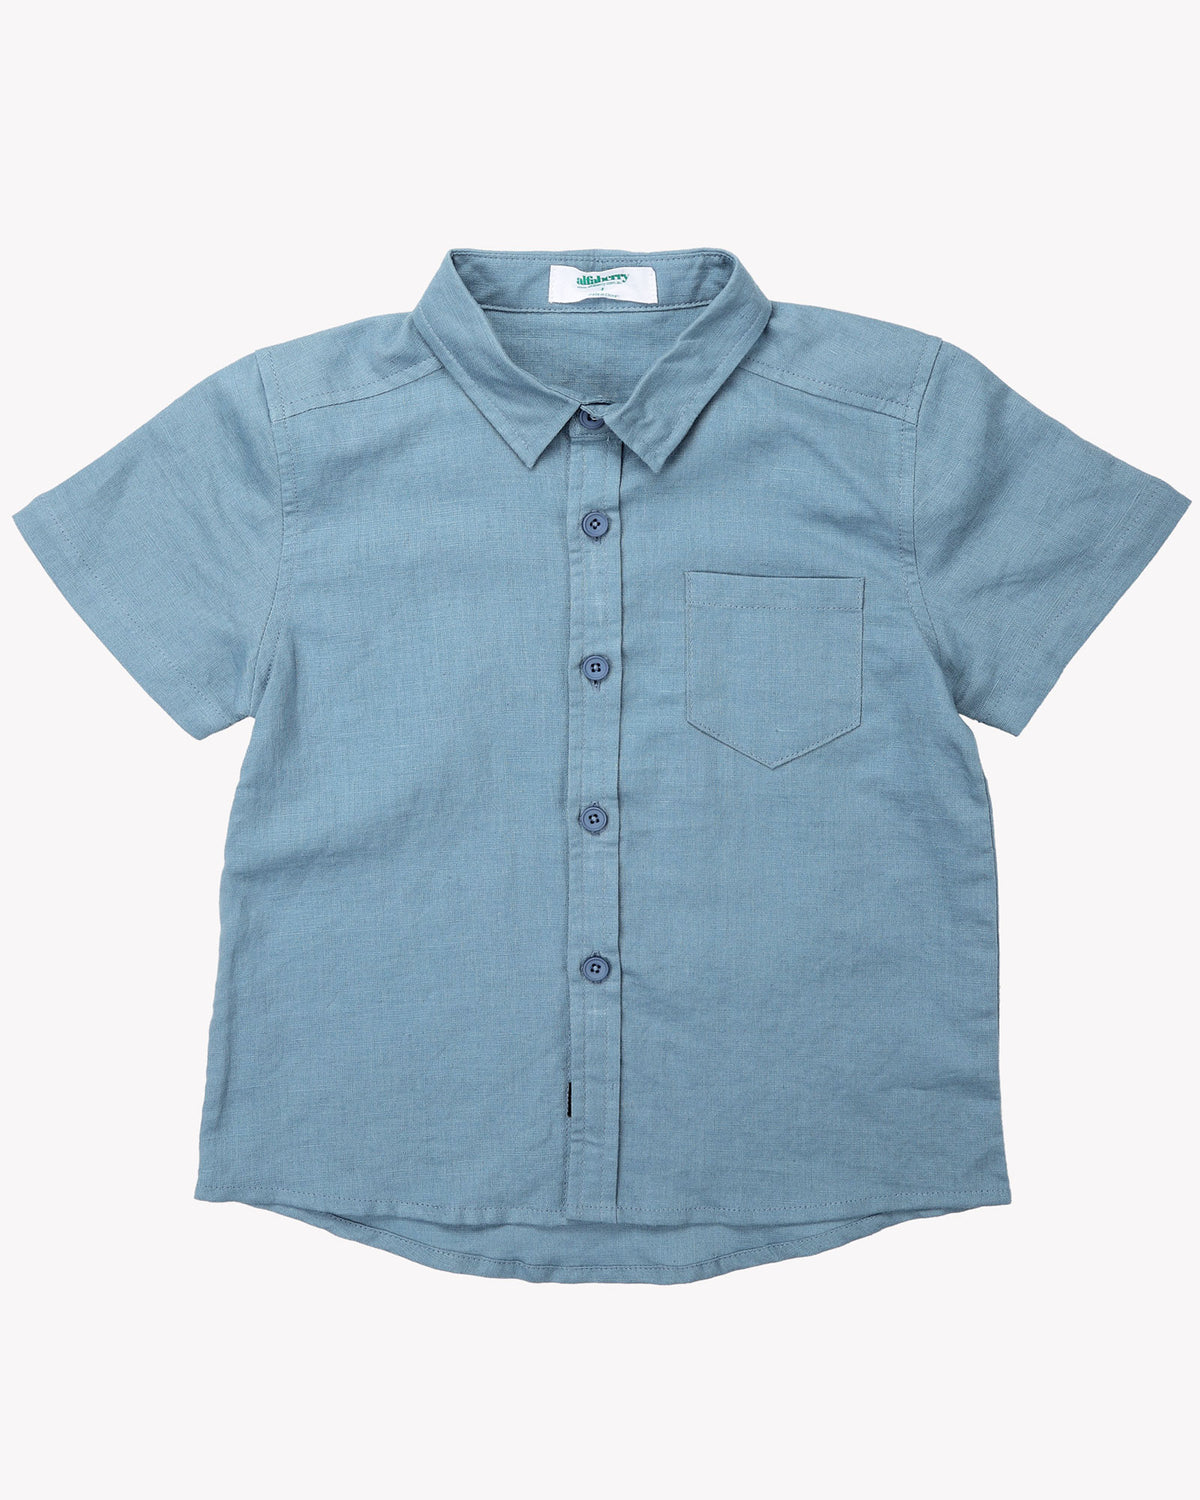 Classic Linen Shirt In Steel Blue Front